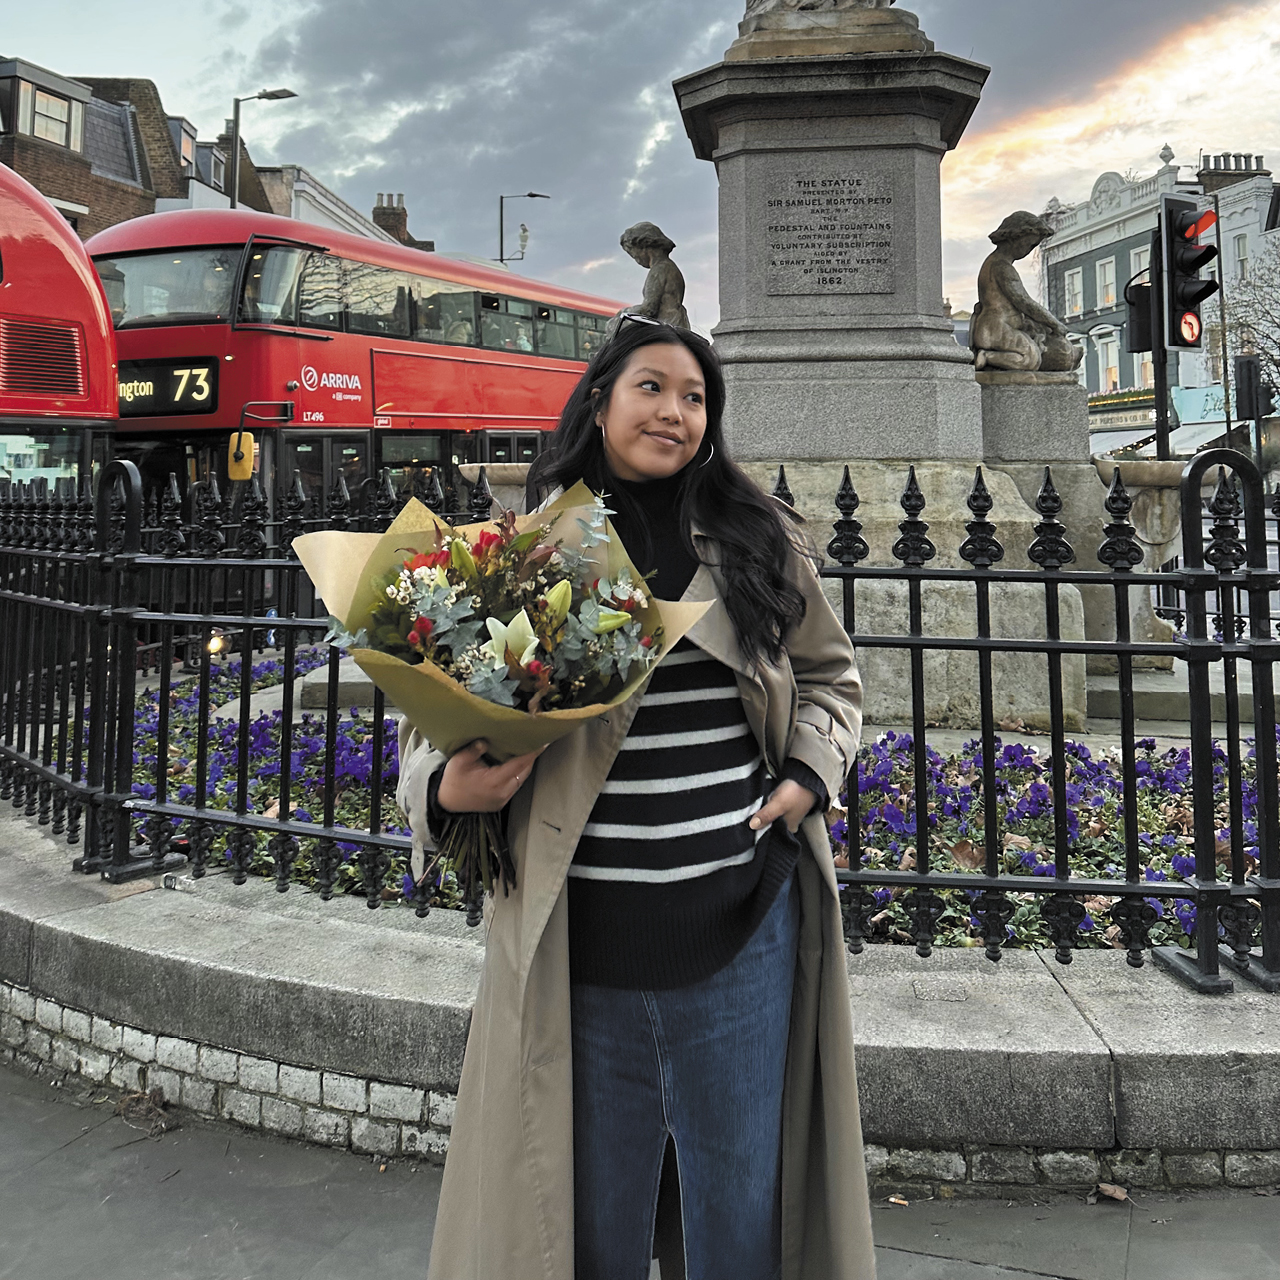 The writer in a striped shirt and trench carrying a bouquet of flowers